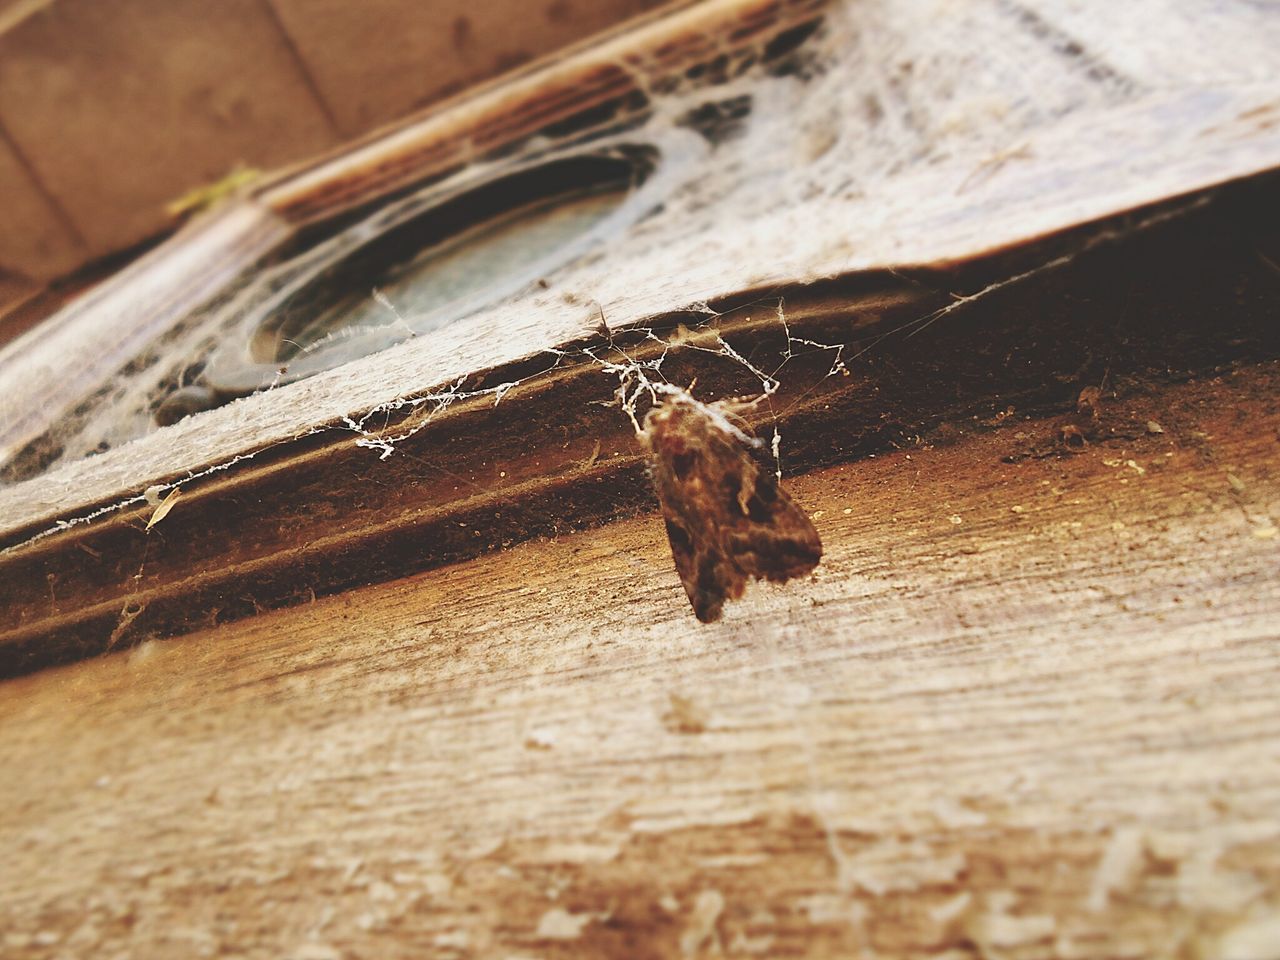 wood - material, animal themes, insect, indoors, close-up, one animal, animals in the wild, wooden, selective focus, wildlife, wood, table, plank, high angle view, no people, day, focus on foreground, metal, dead animal